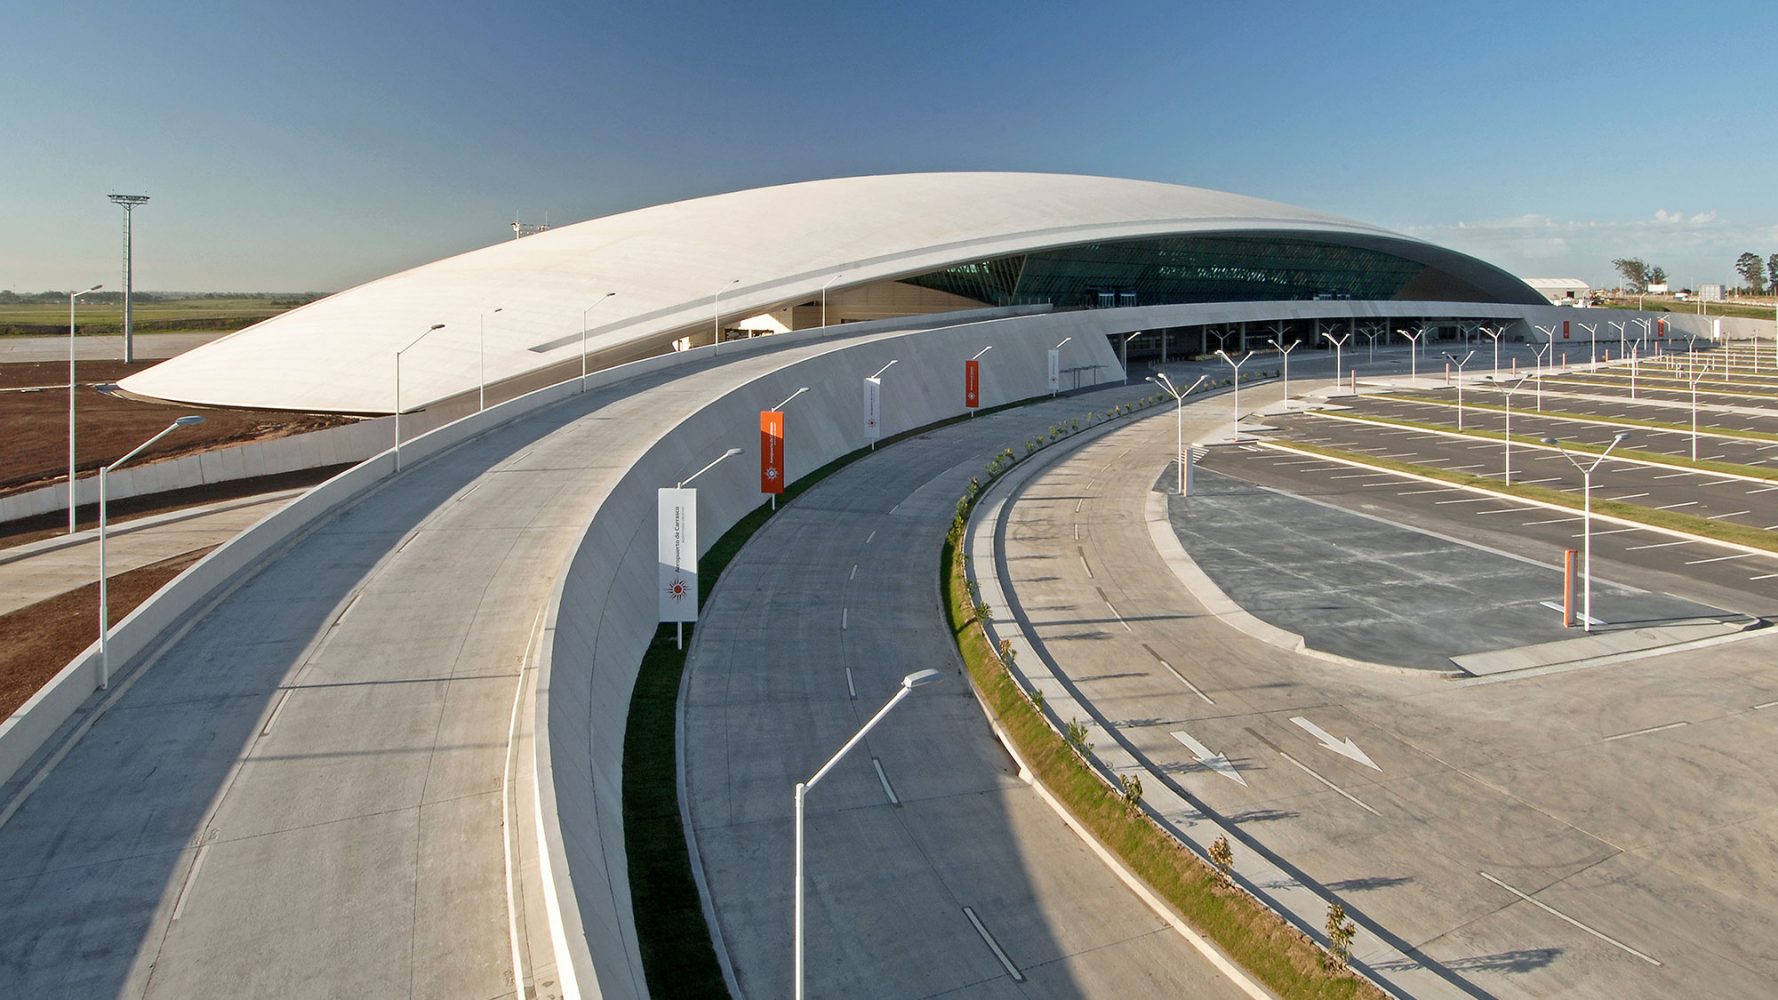 New Terminal Carrasco International Airport, Source by Rafael ViÃ±oly Architects